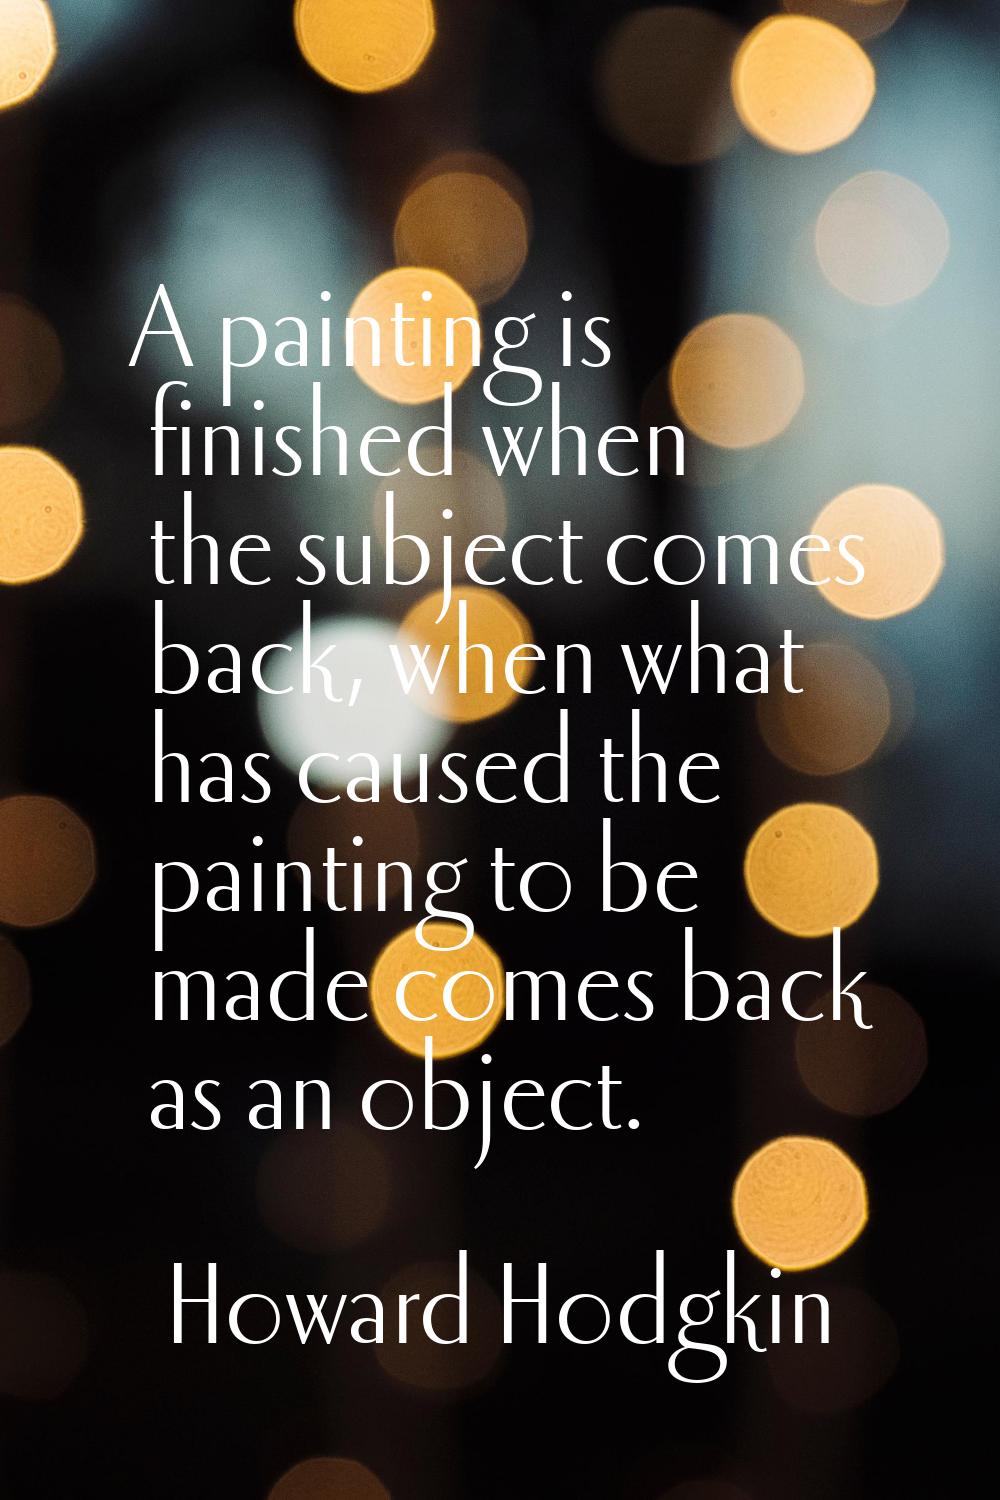 A painting is finished when the subject comes back, when what has caused the painting to be made co